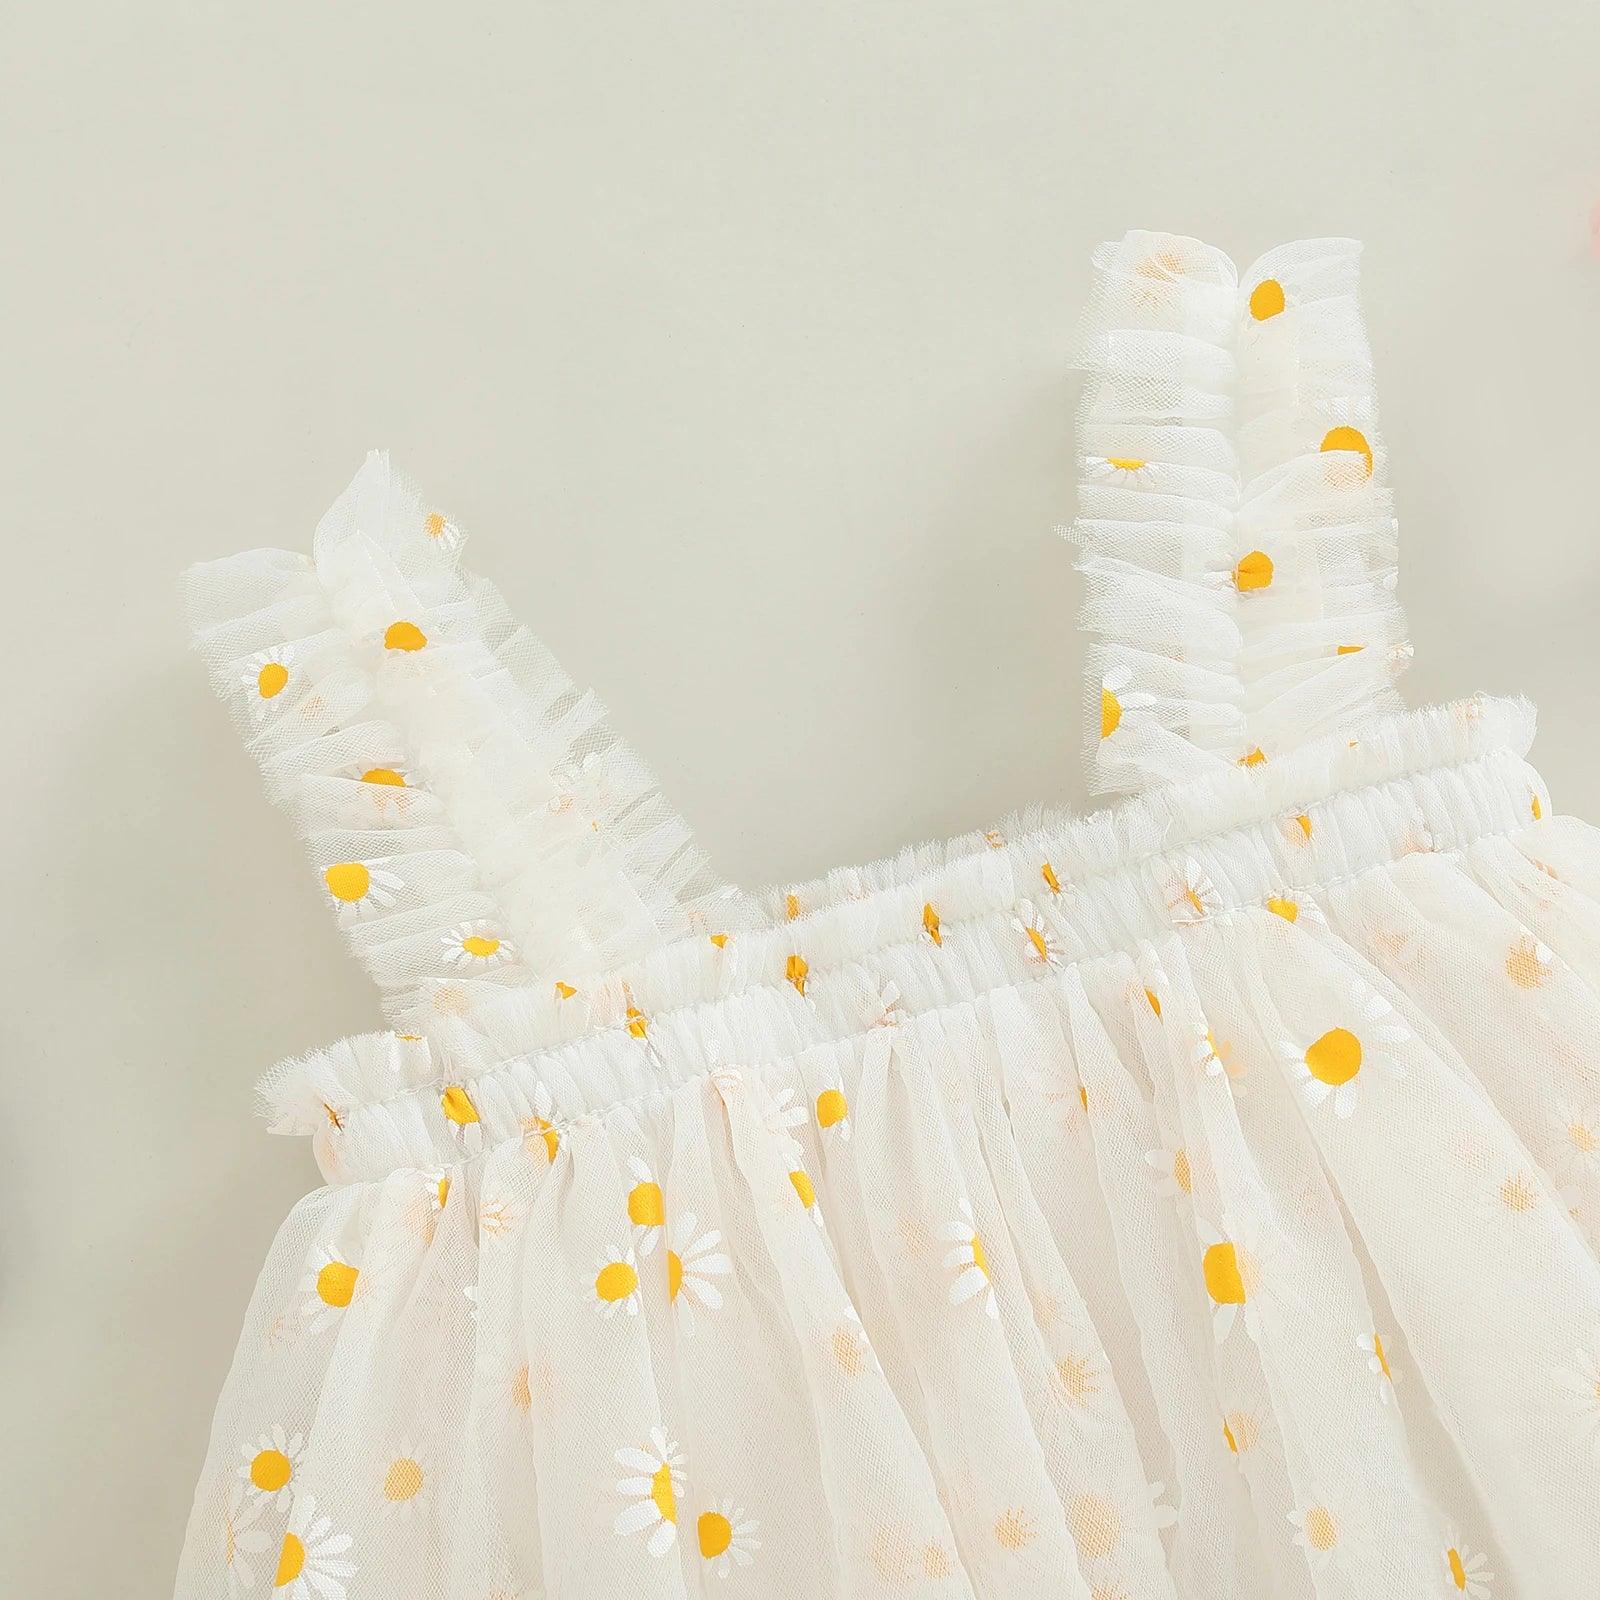 Ma&Baby Daisy Tulle Dress for Girls - Summer Party Beach Holiday Clothing  ourlum.com   